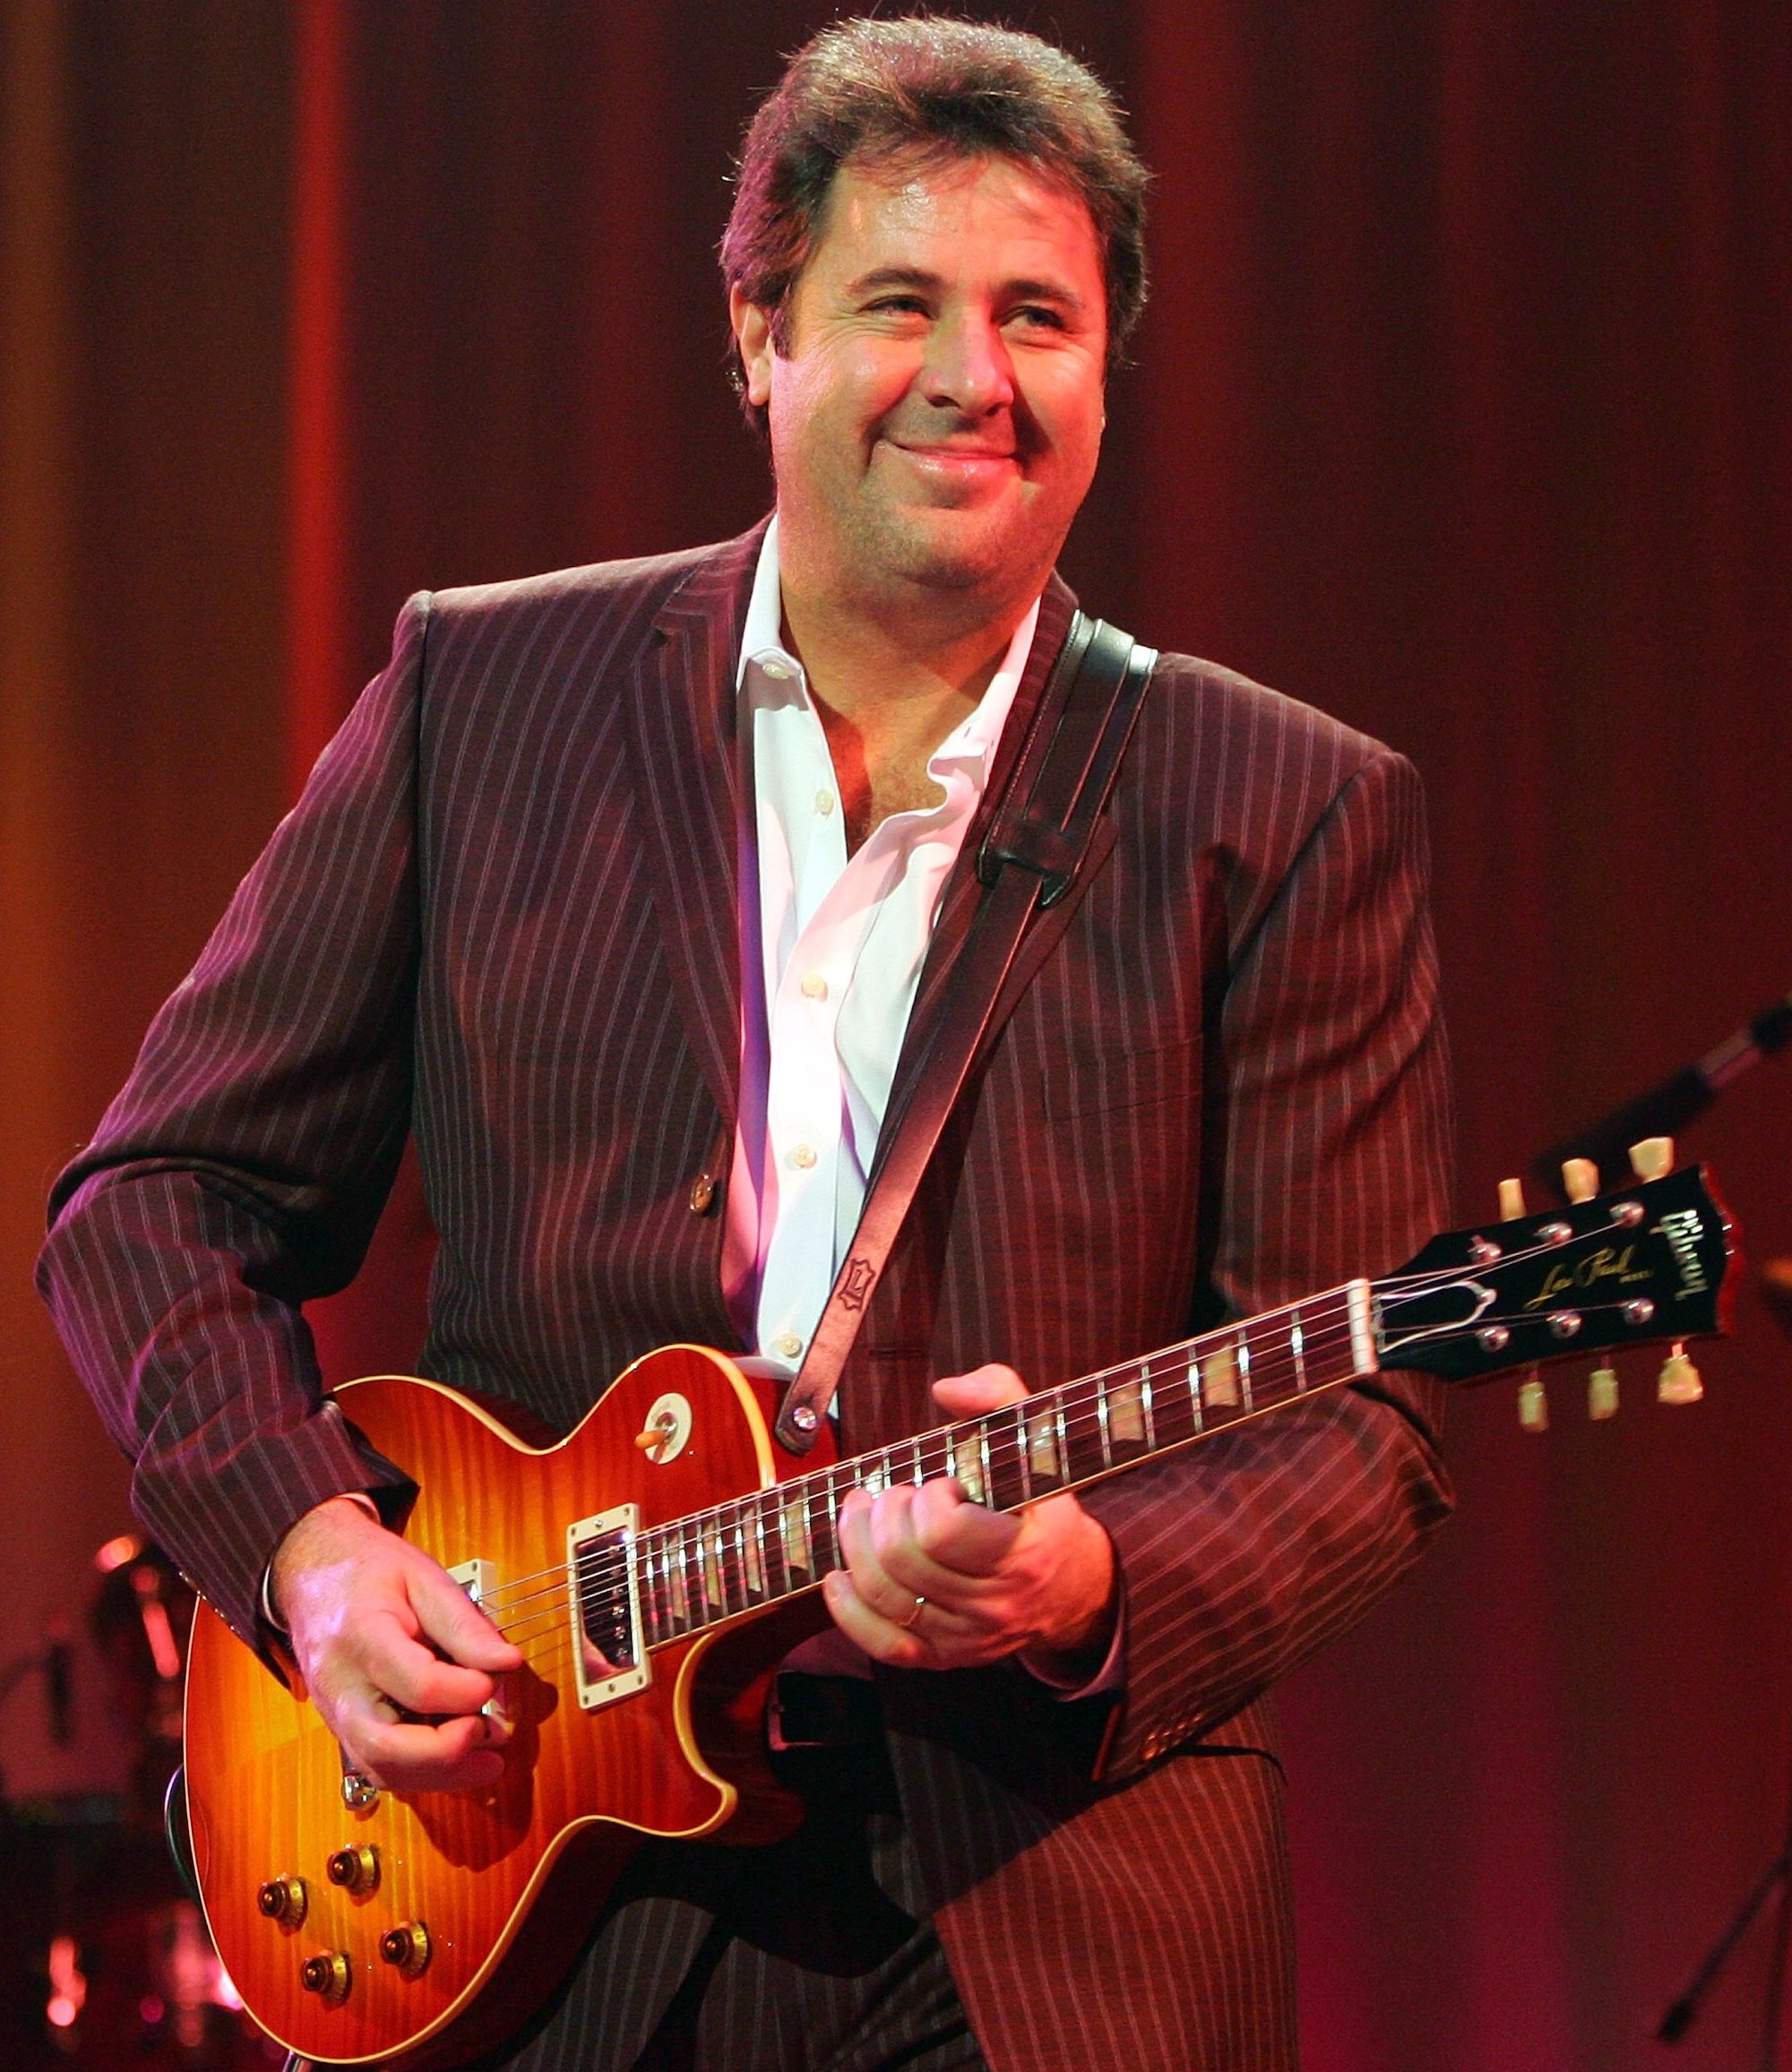 Vince Gill performs onstage at the Las Vegas Hilton on December 9, 2006